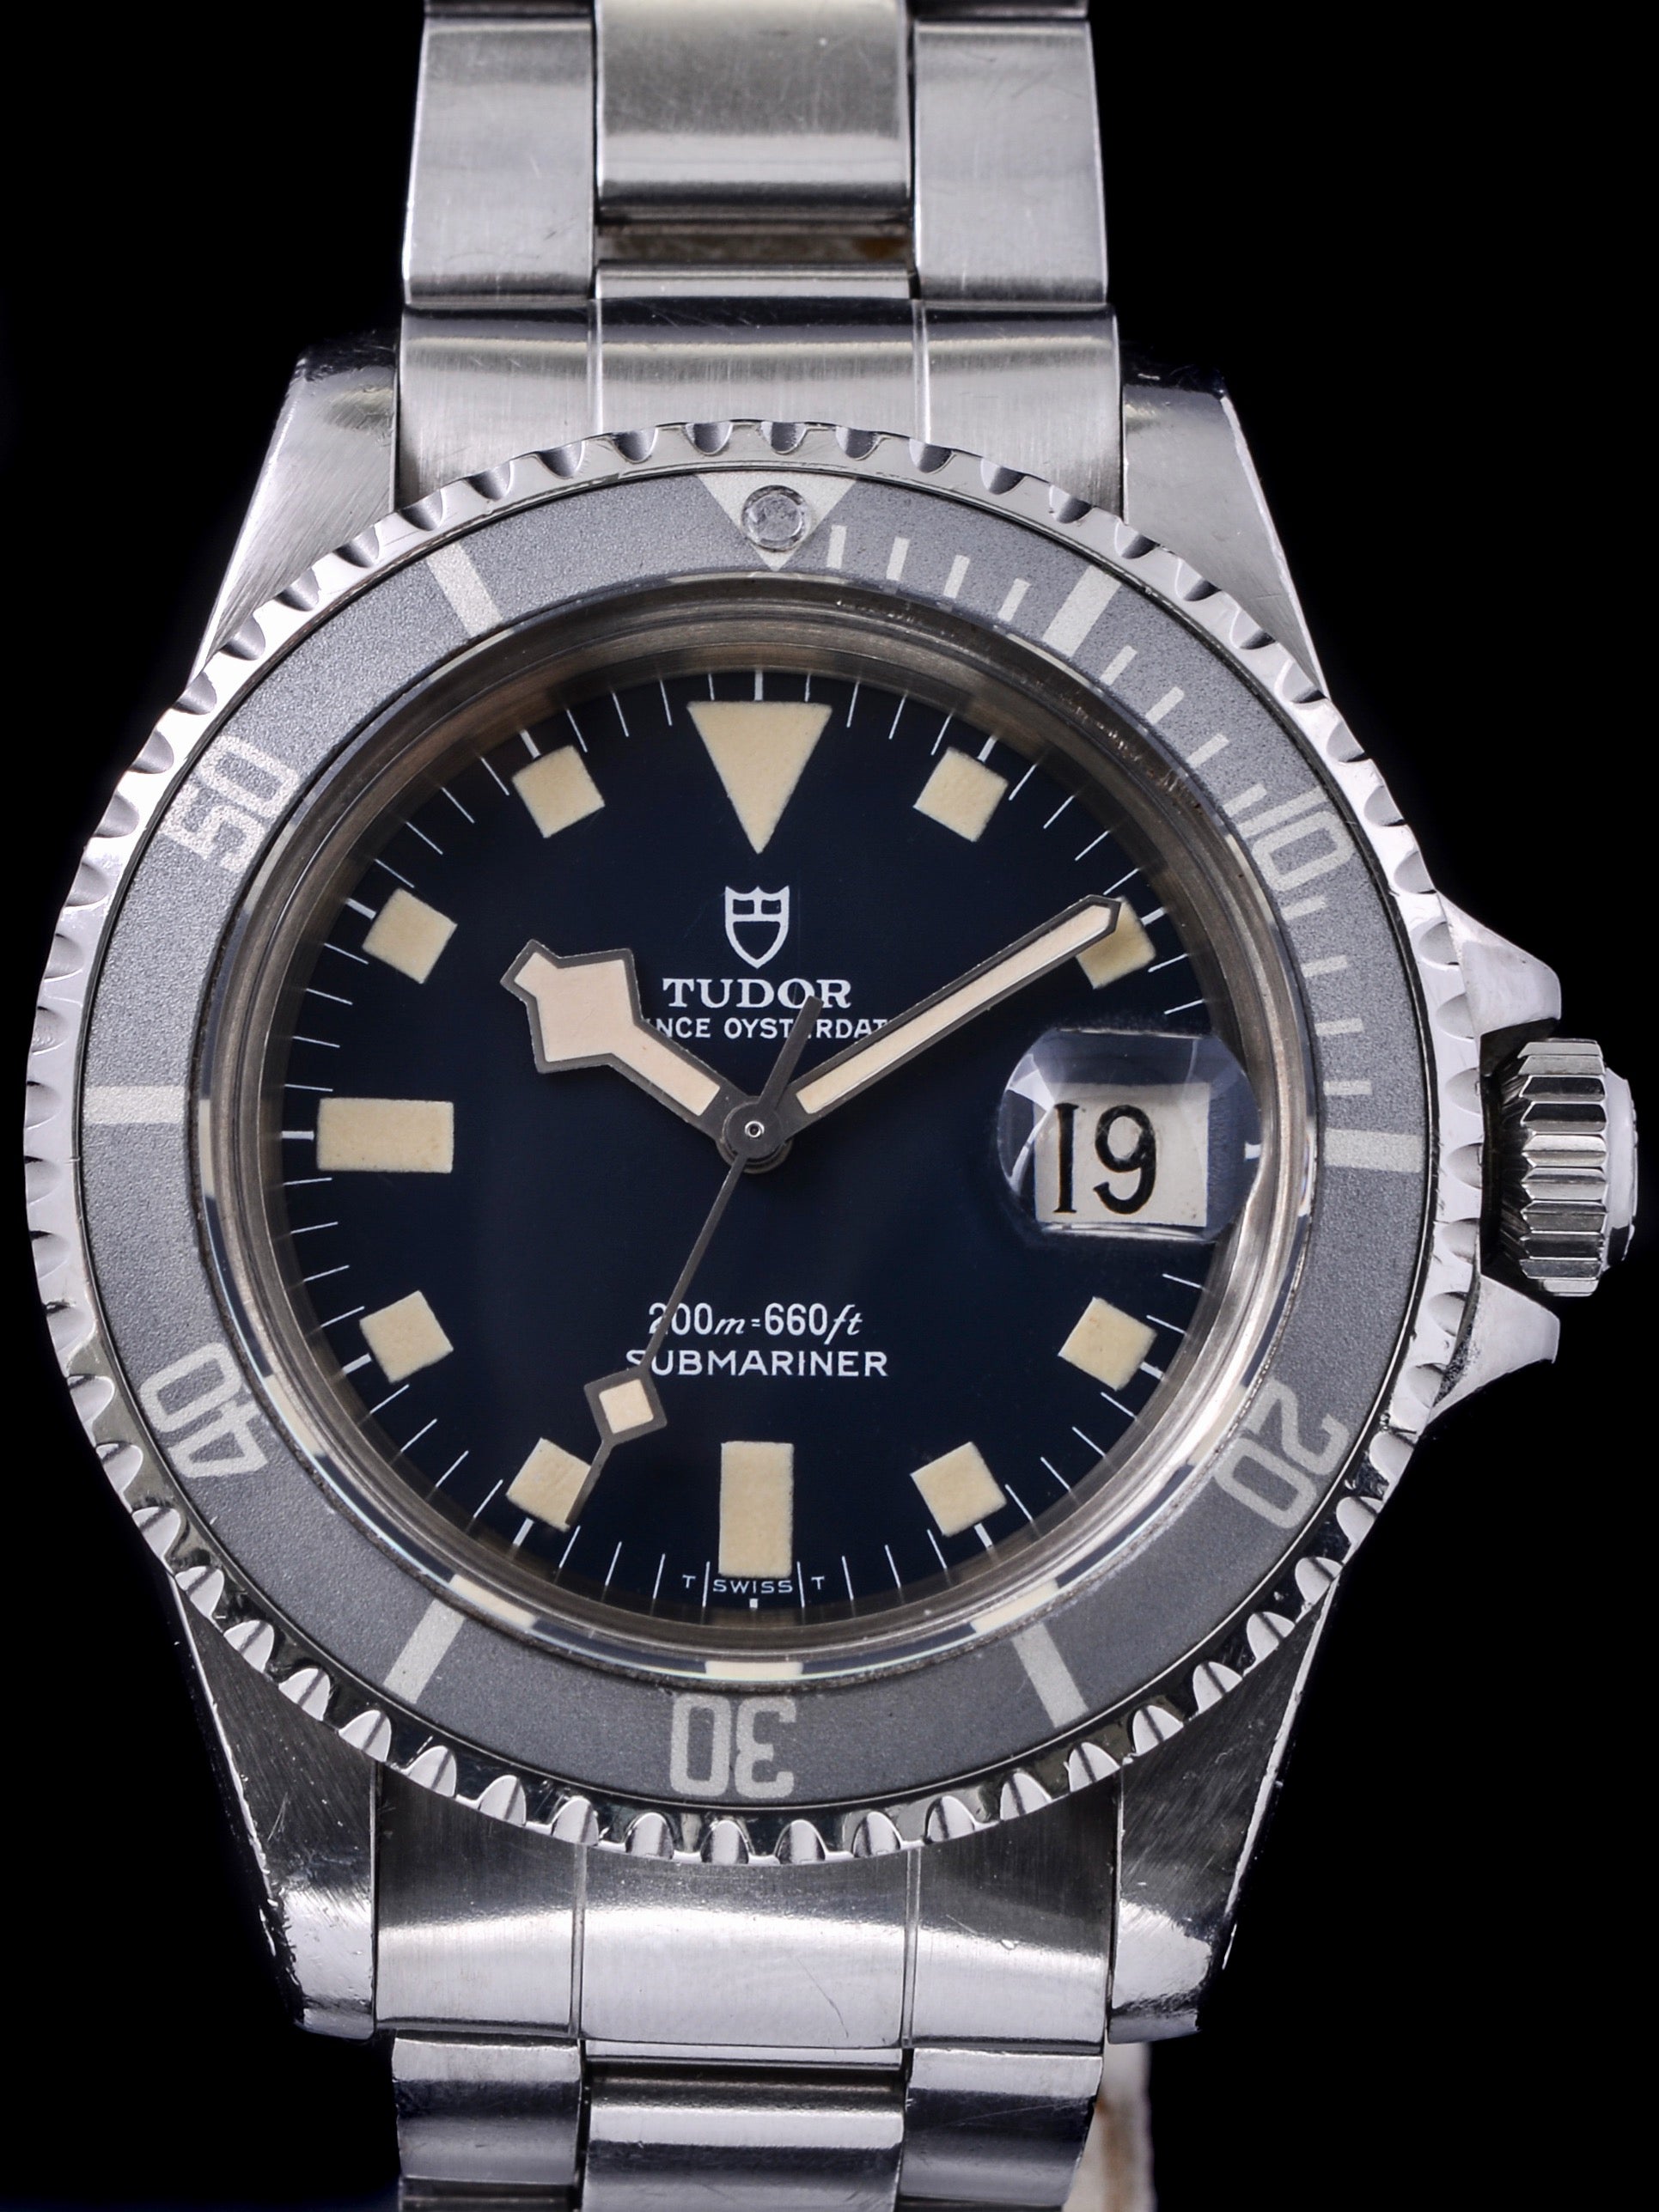 1978 Tudor Blue Submariner (Ref. 94110) "Snowflake" with Box and Papers